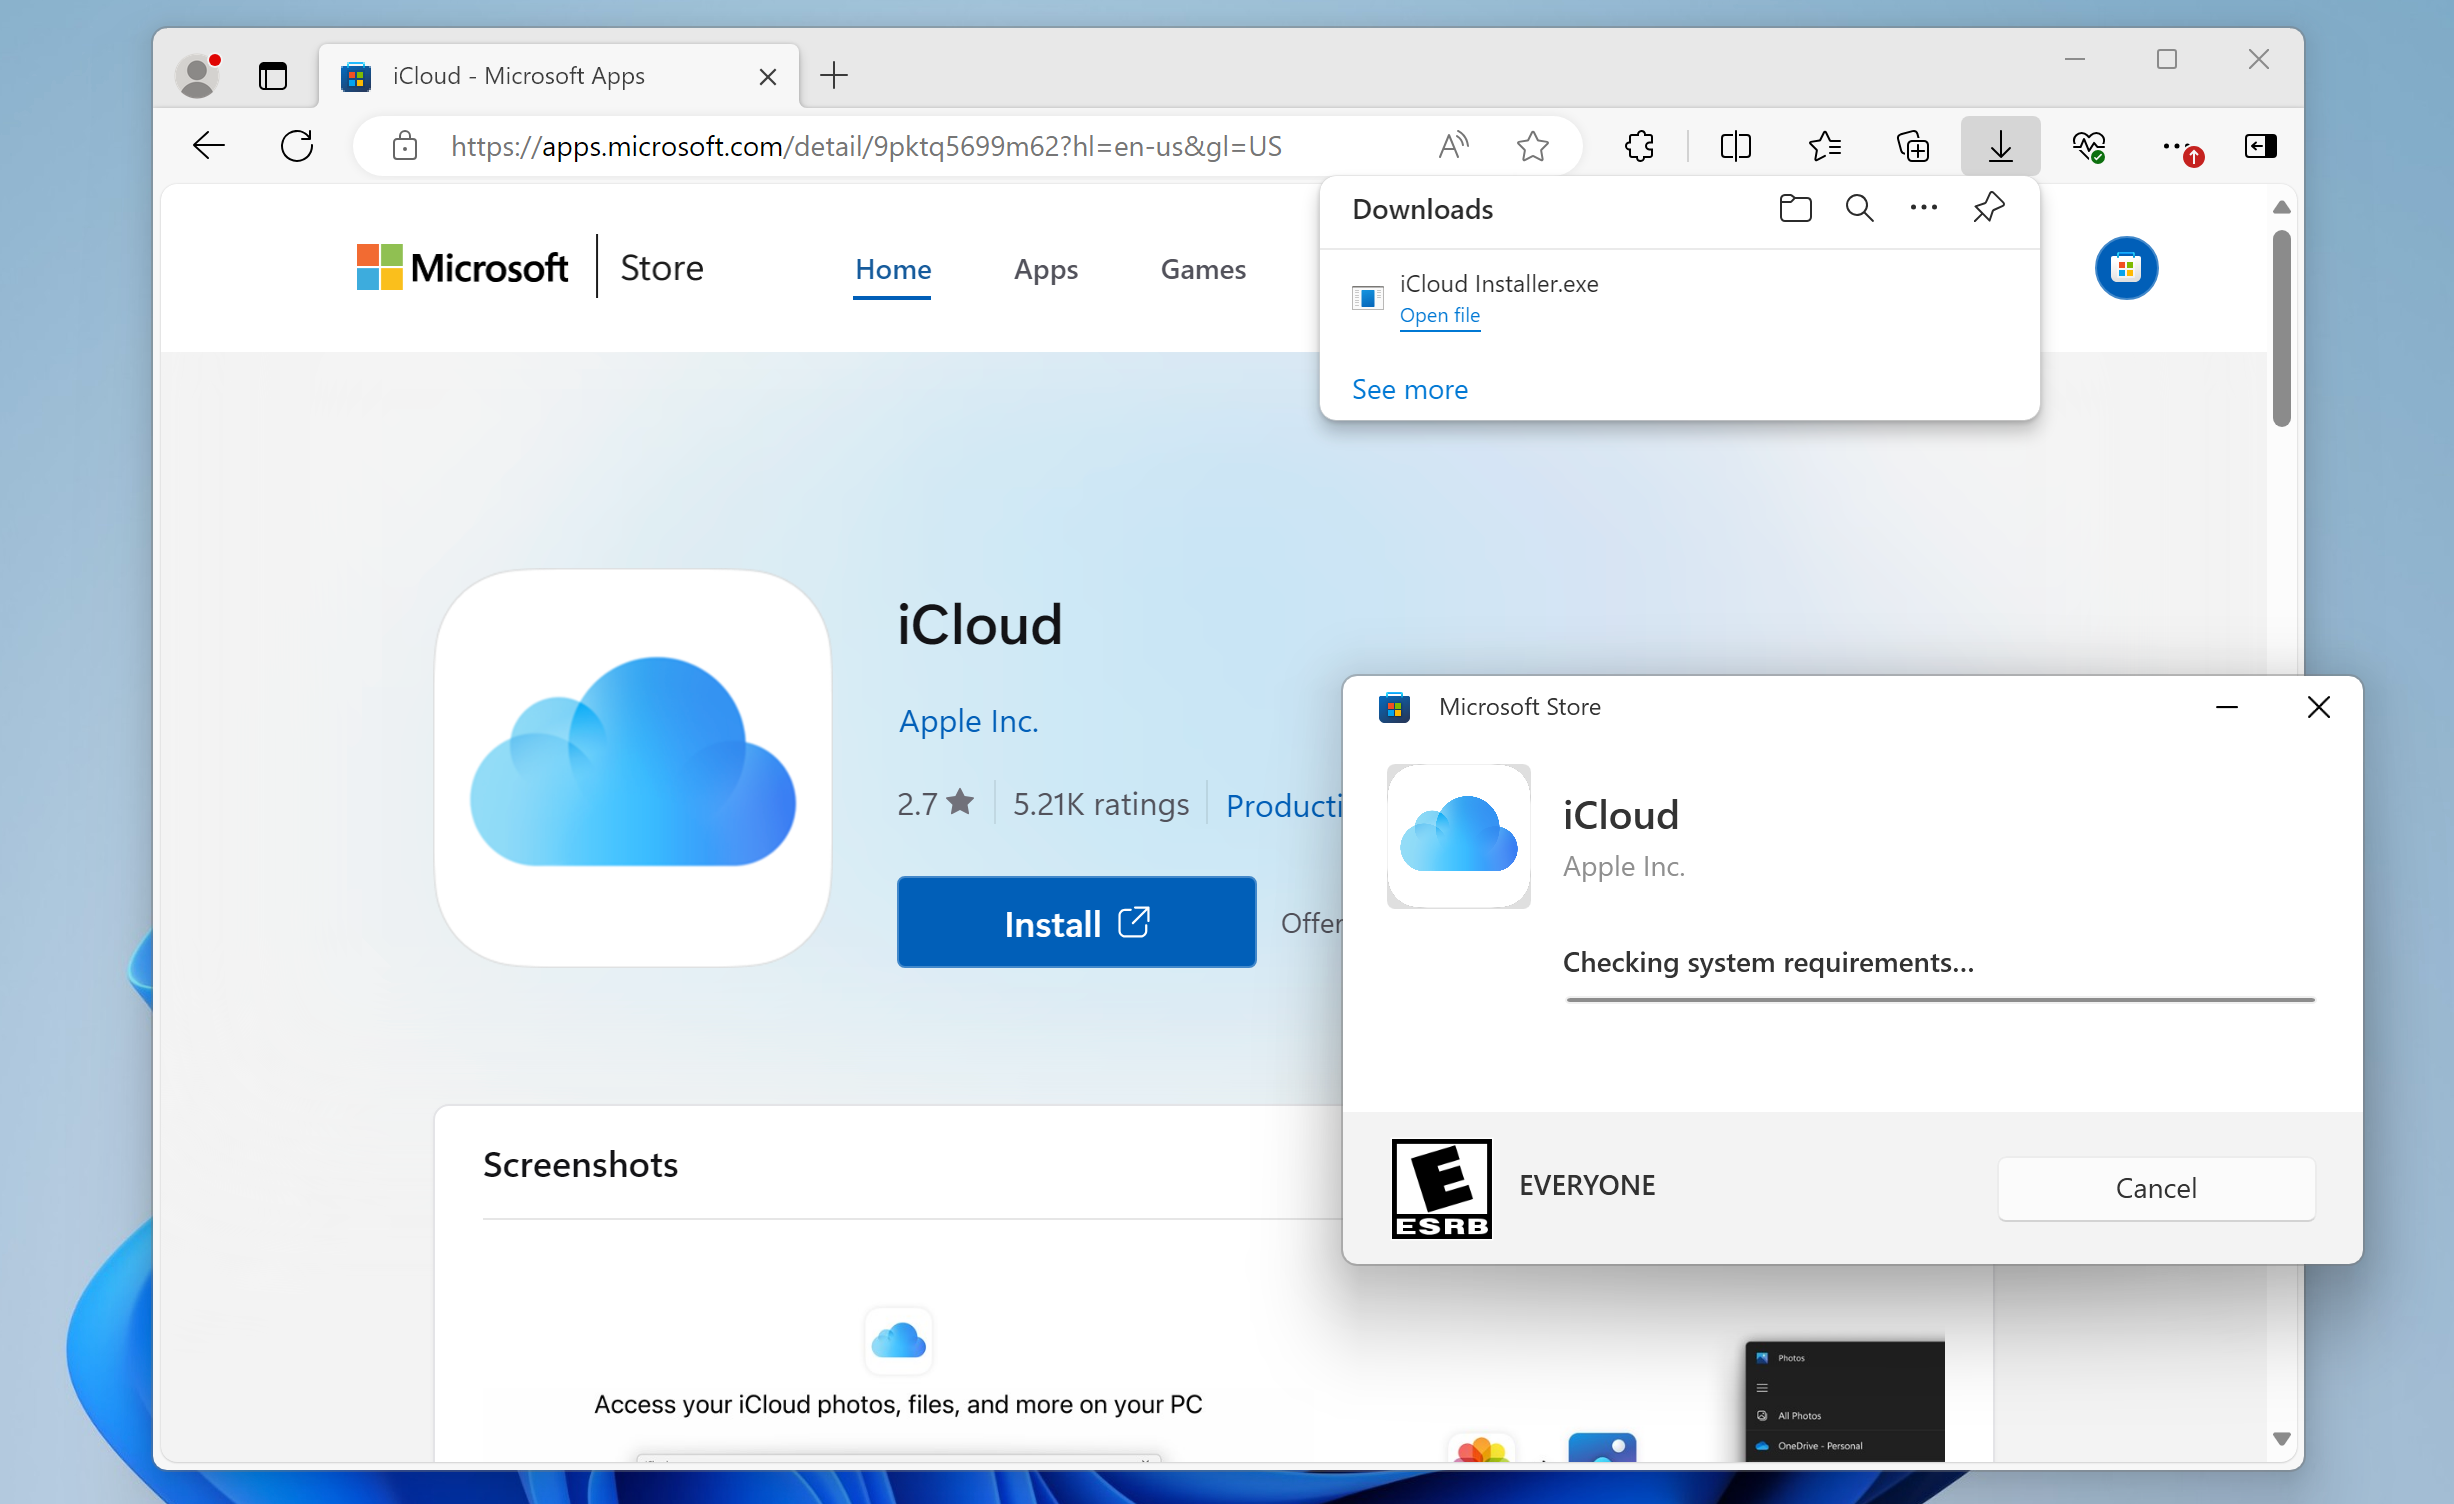 Screenshot of the installer for iCloud opened from the Microsoft Store website.